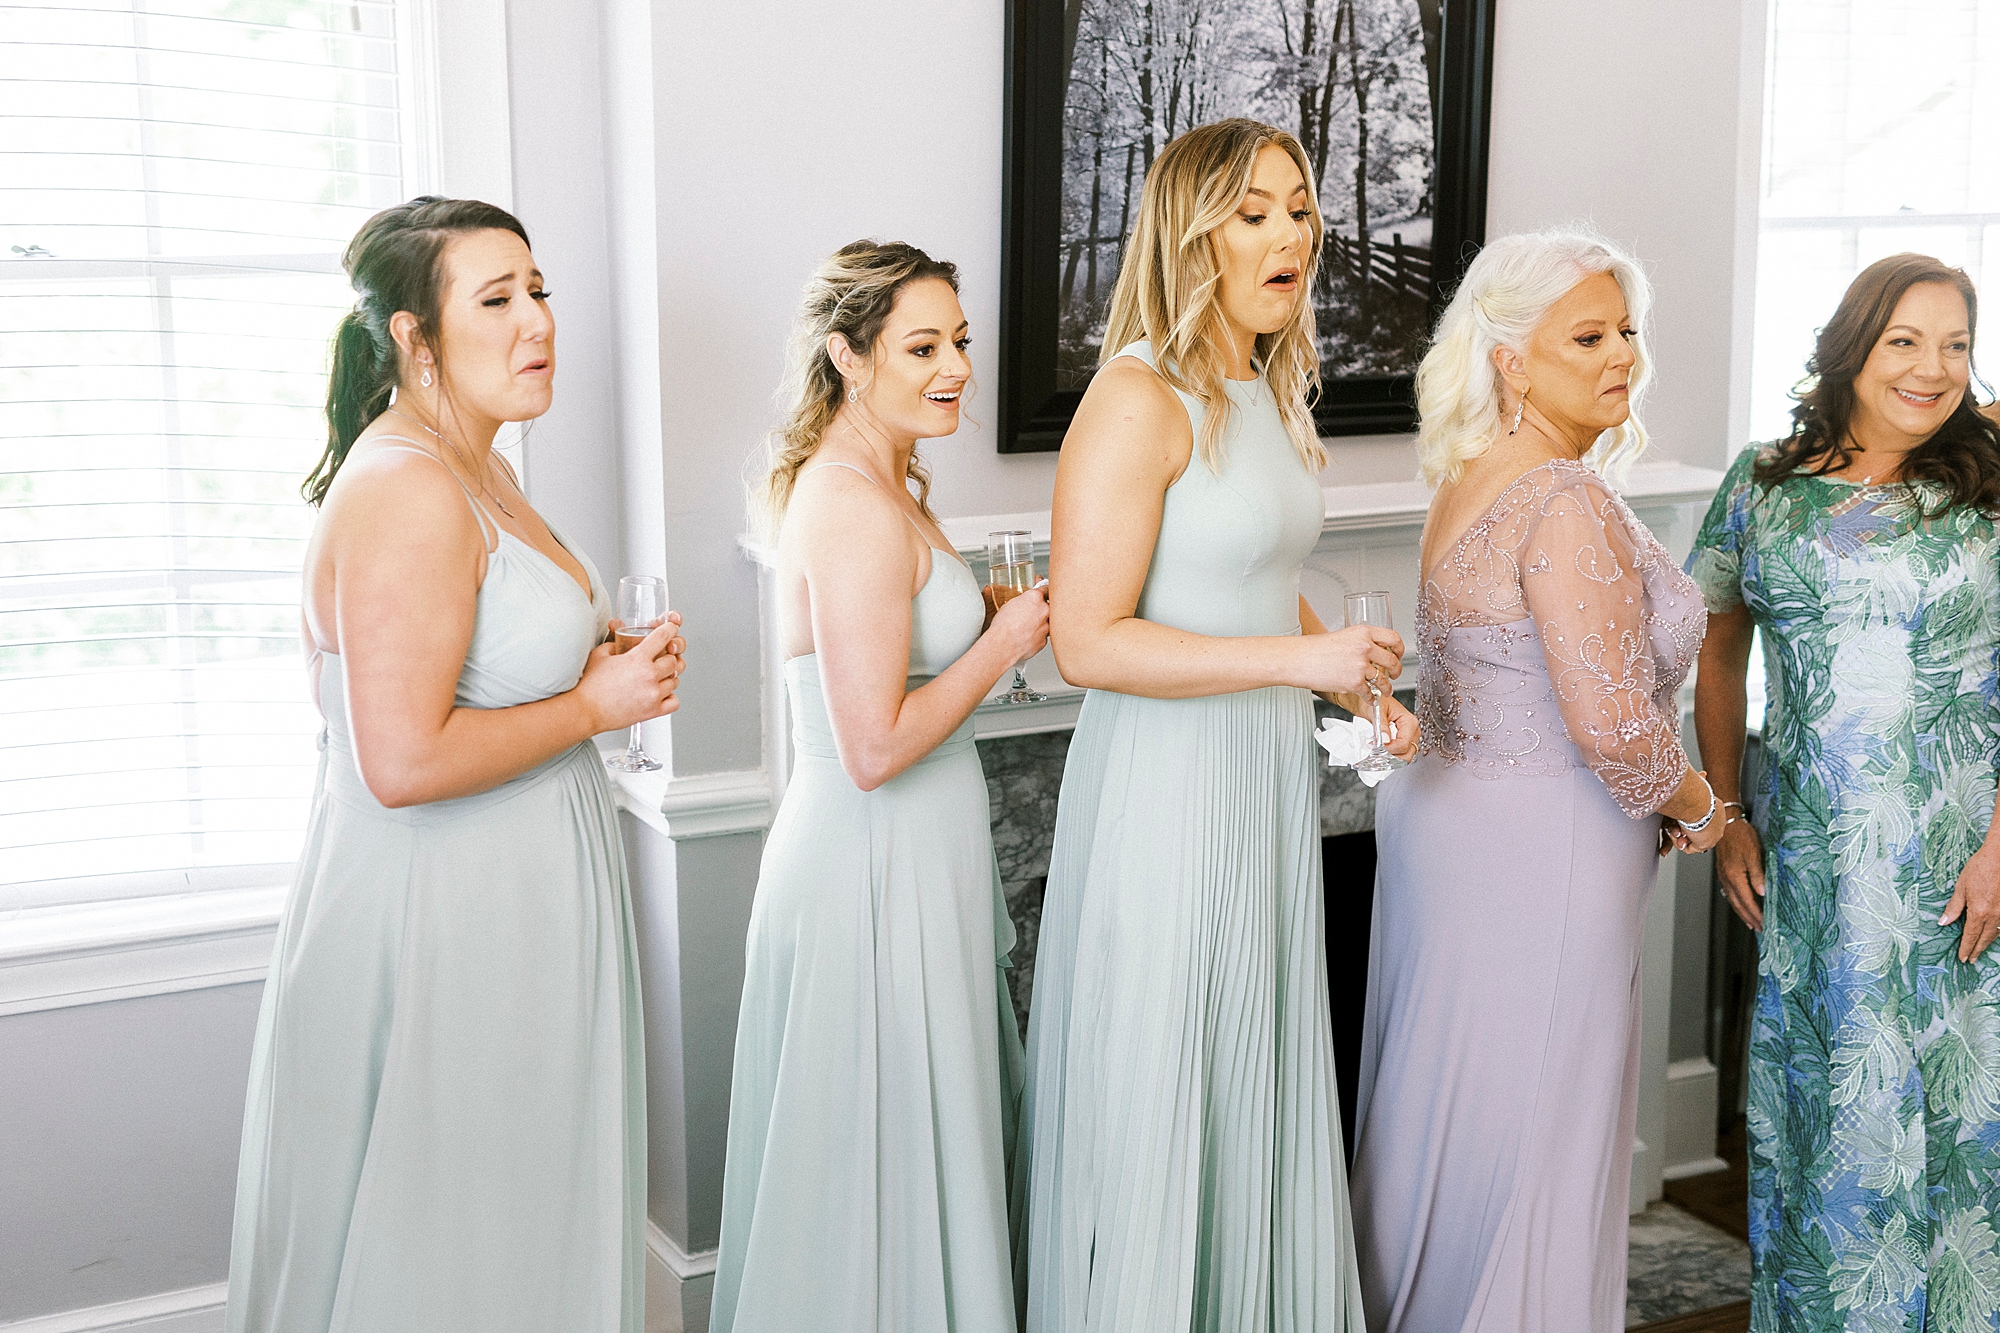 bridesmaids react to seeing bride in wedding gown